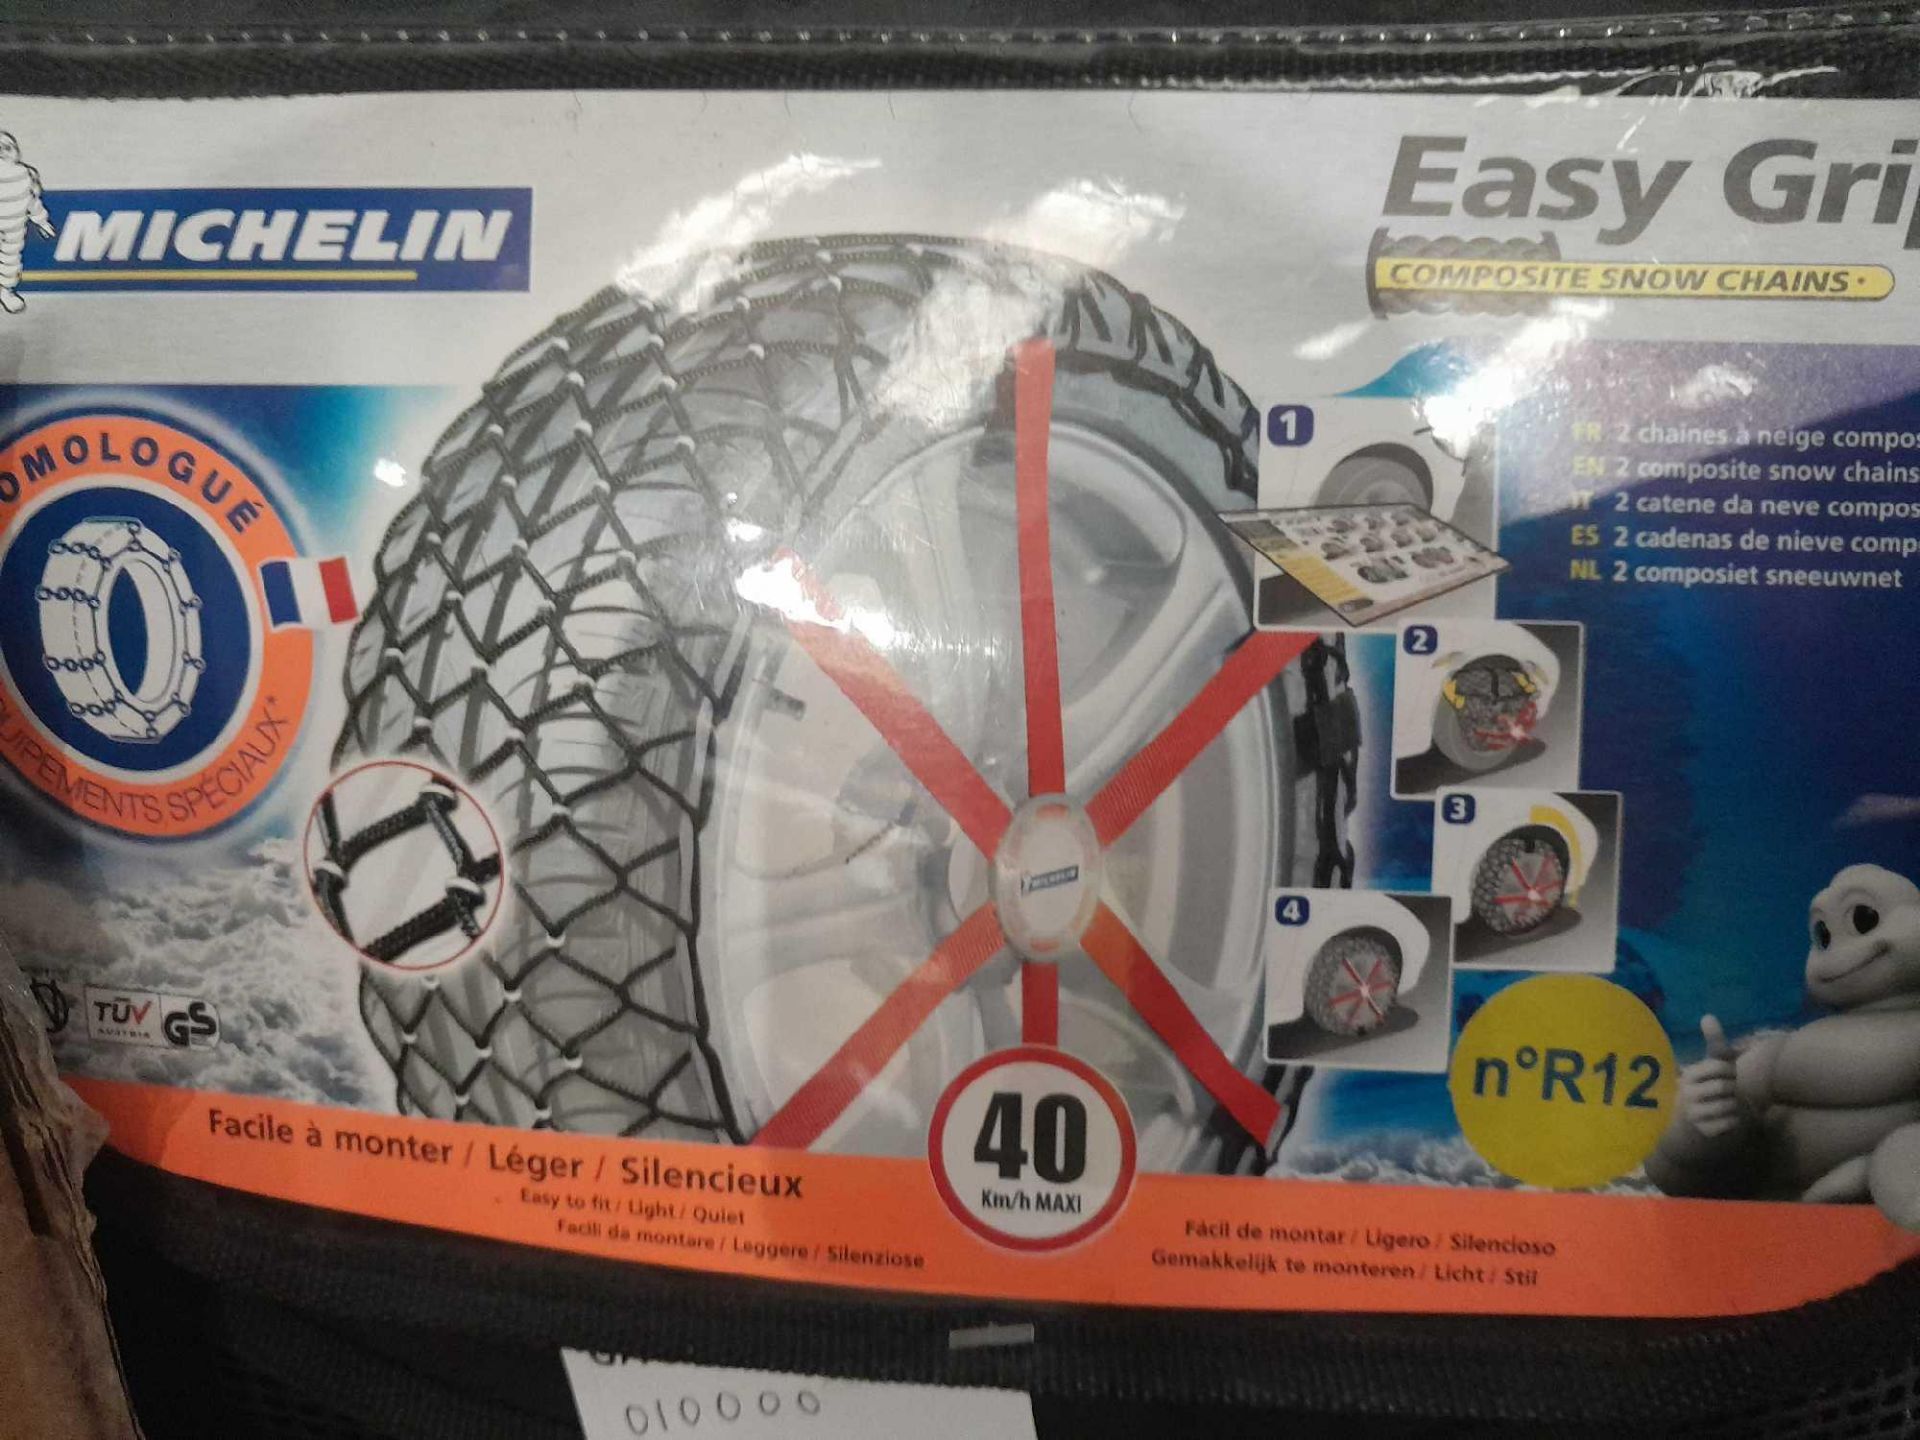 RRP £100 Brand New Michelin Easy Grip Snow Chains - Nor12 - Image 2 of 2